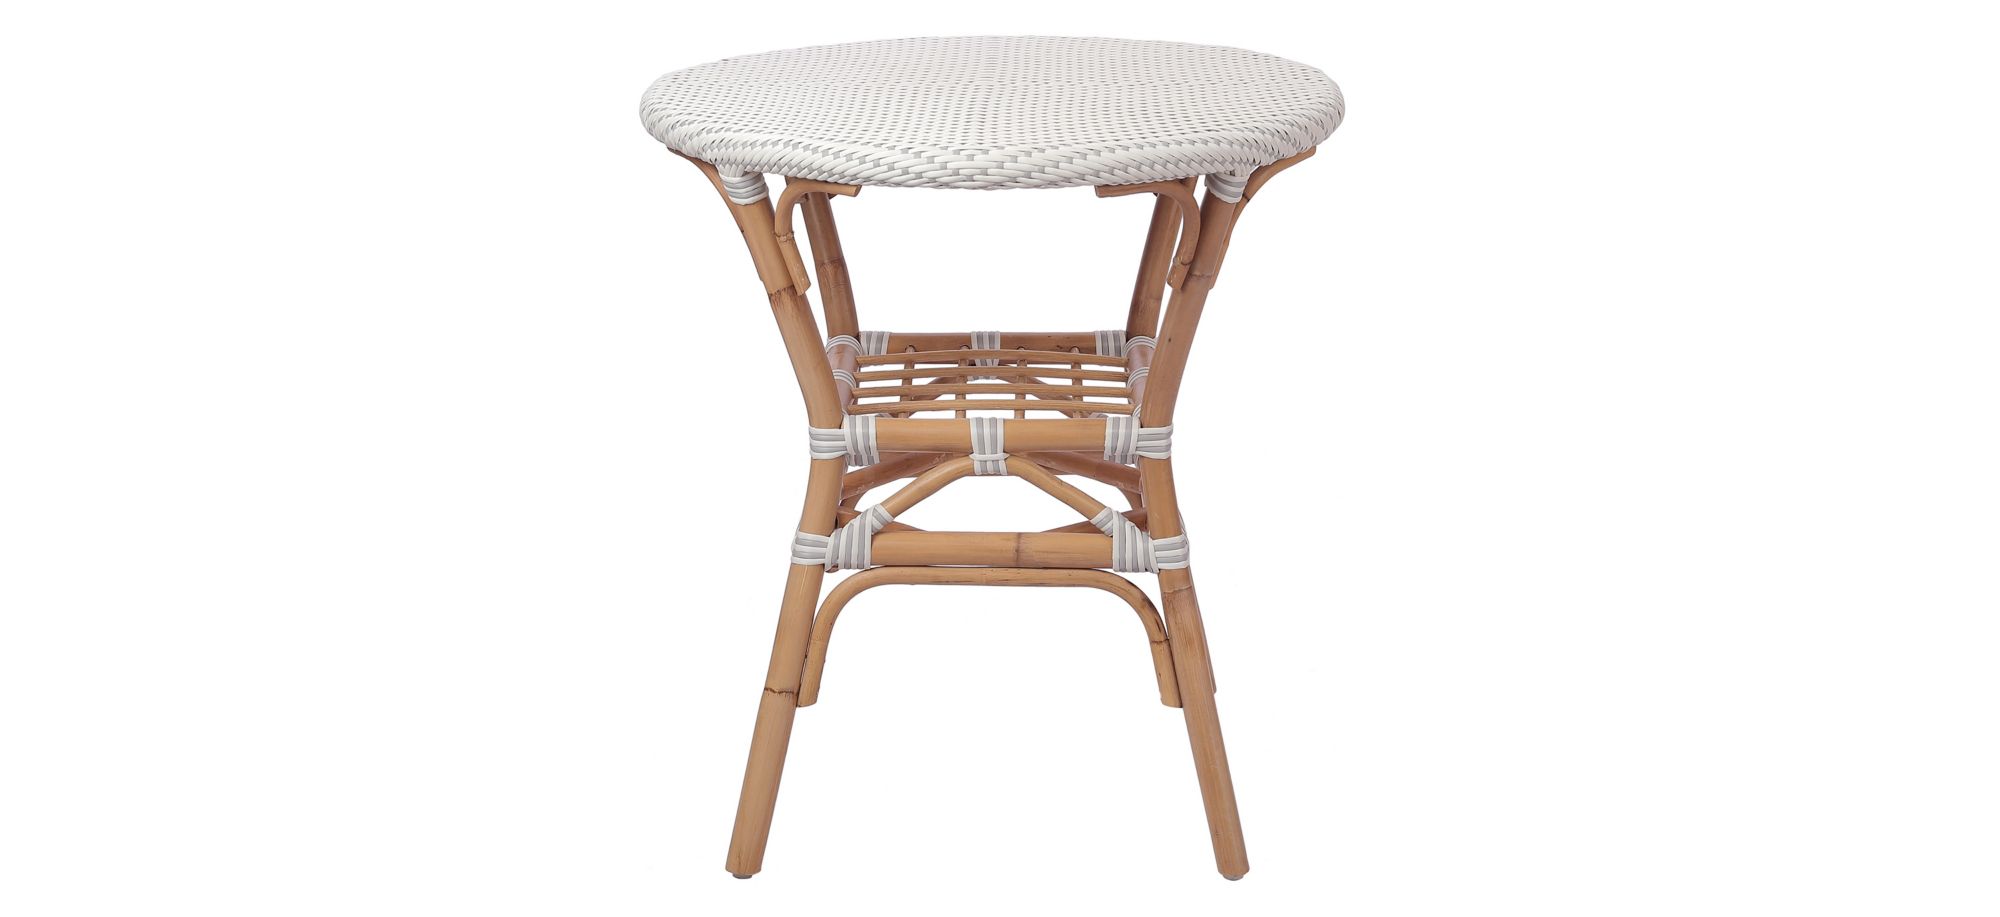 Orleans Paris Rattan Bistro Table in White/Gray by New Pacific Direct